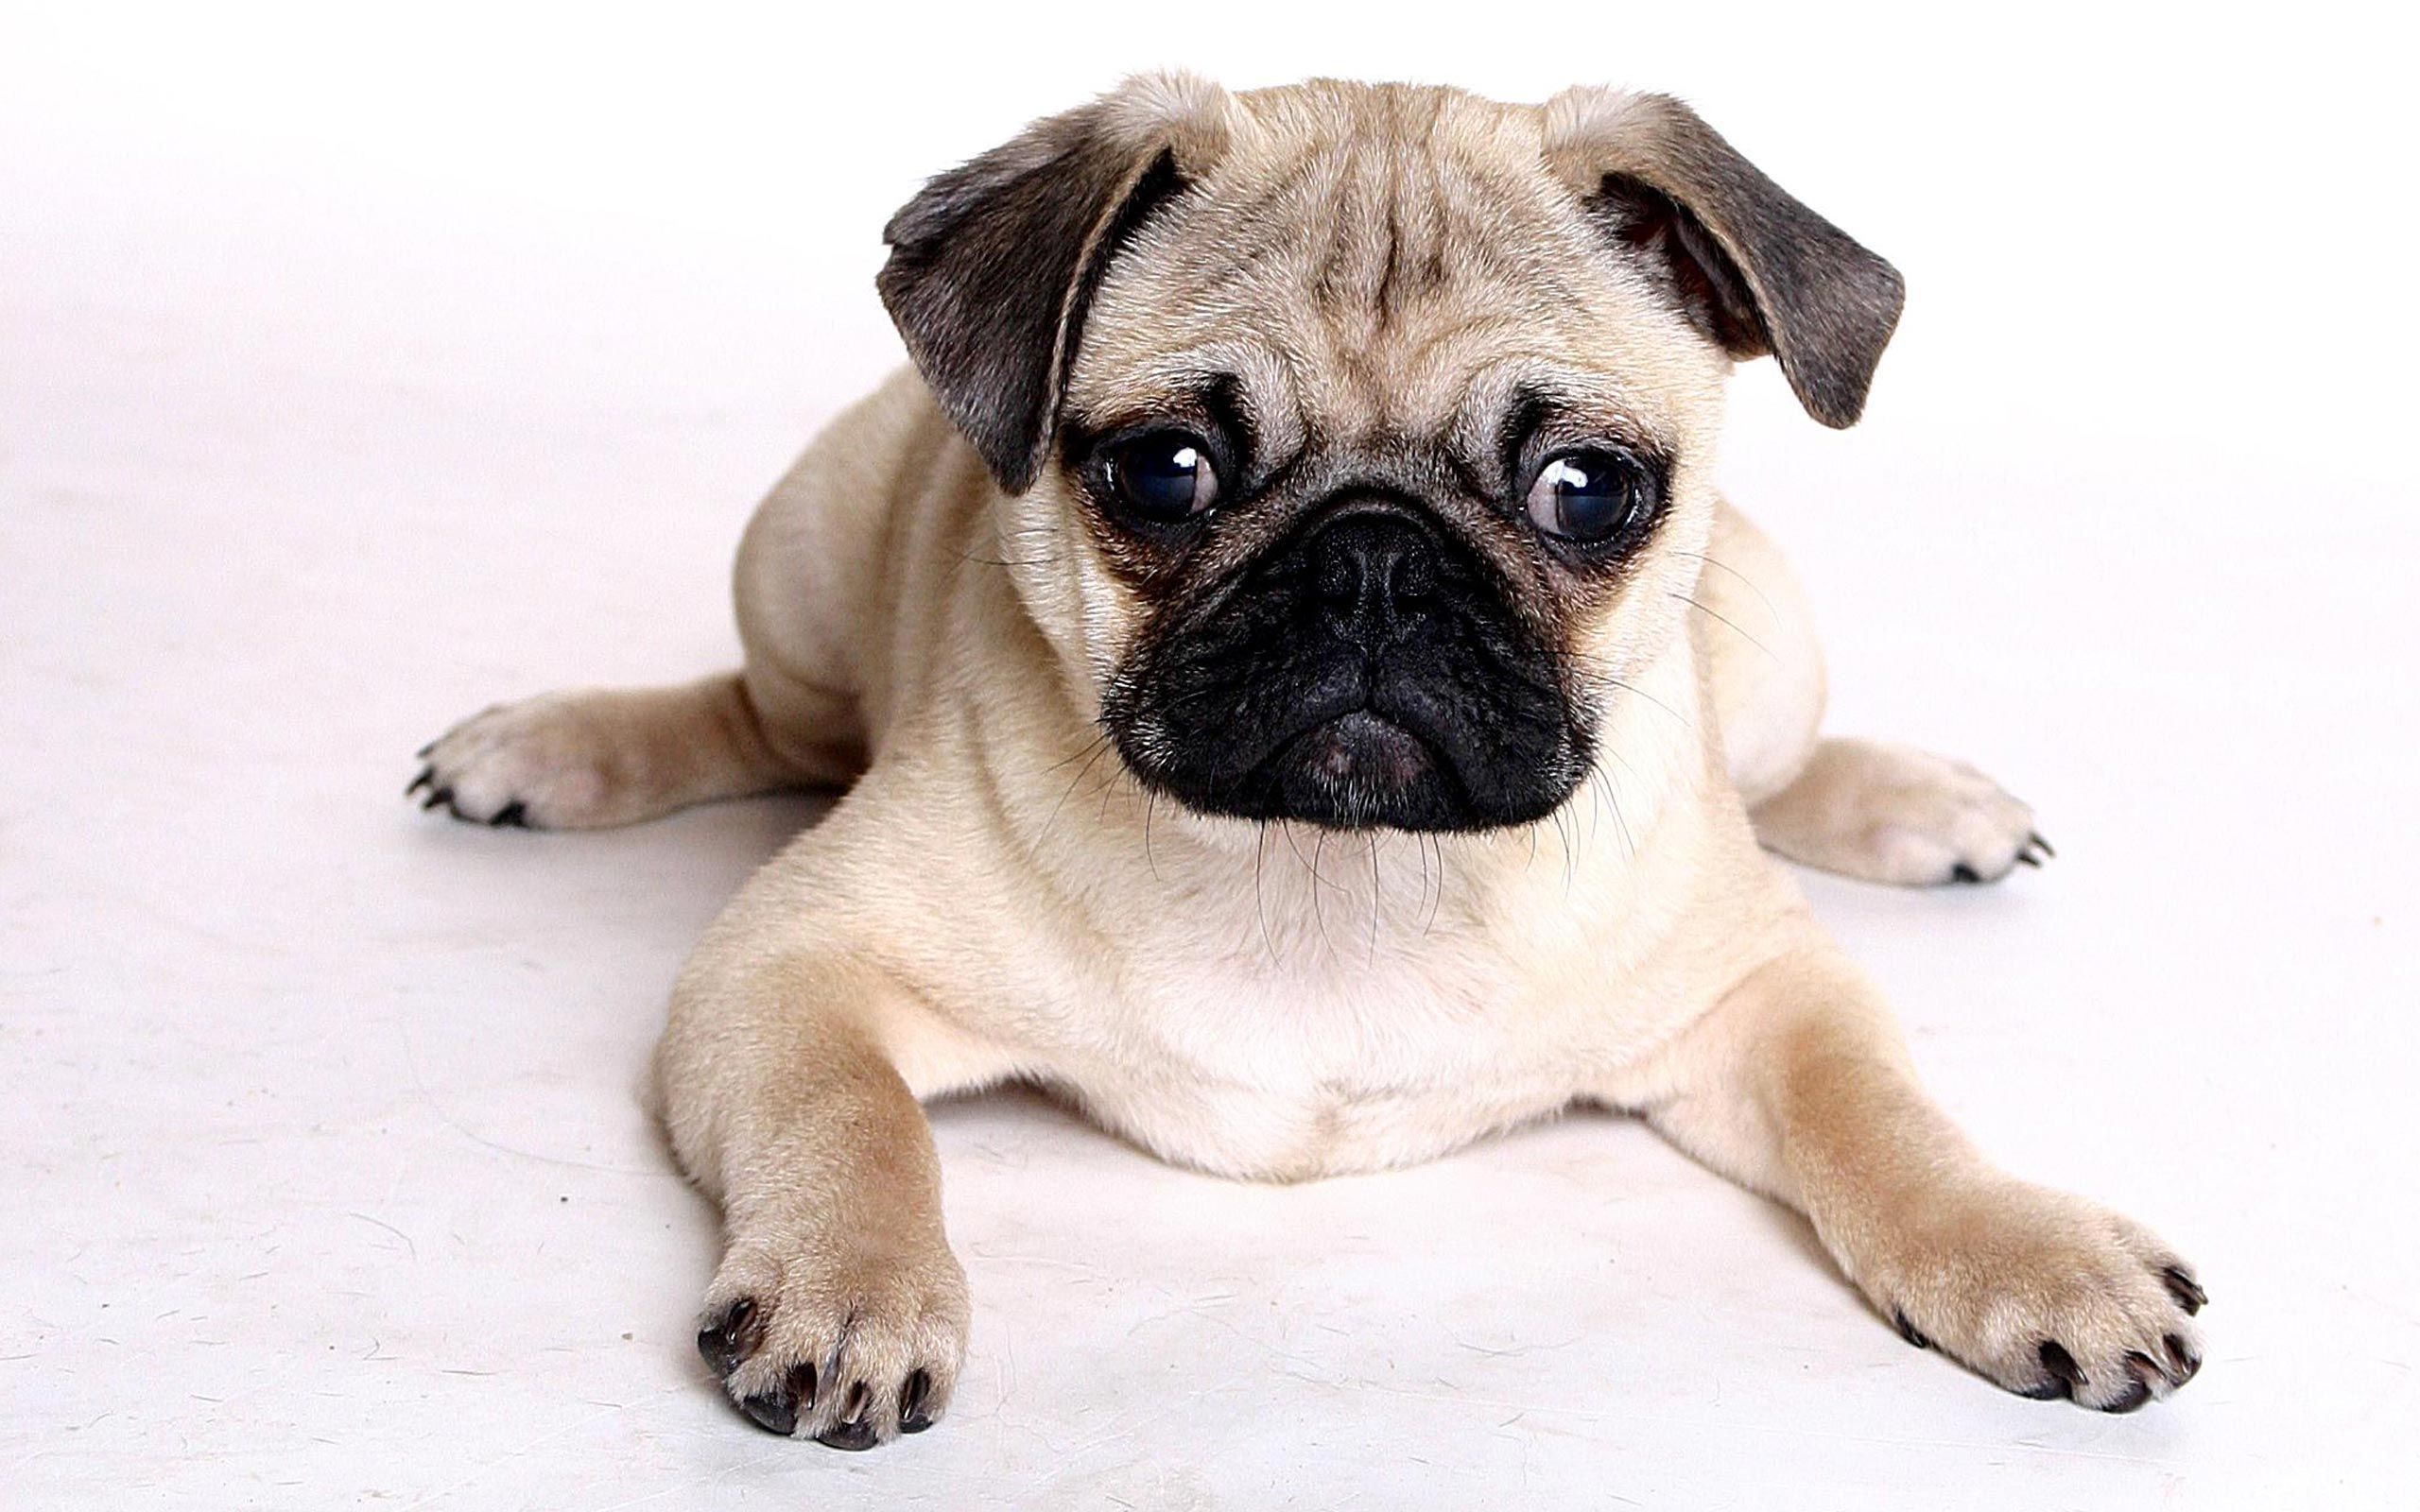 Free Pug Puppies In Utah Why Pugs Are The Perfect Family Pet Pethelpful Newborn Pug Baby Pugs Cute Baby Pugs Pug Puppies Baby. Pug wallpaper, Chinese pug, Pugs